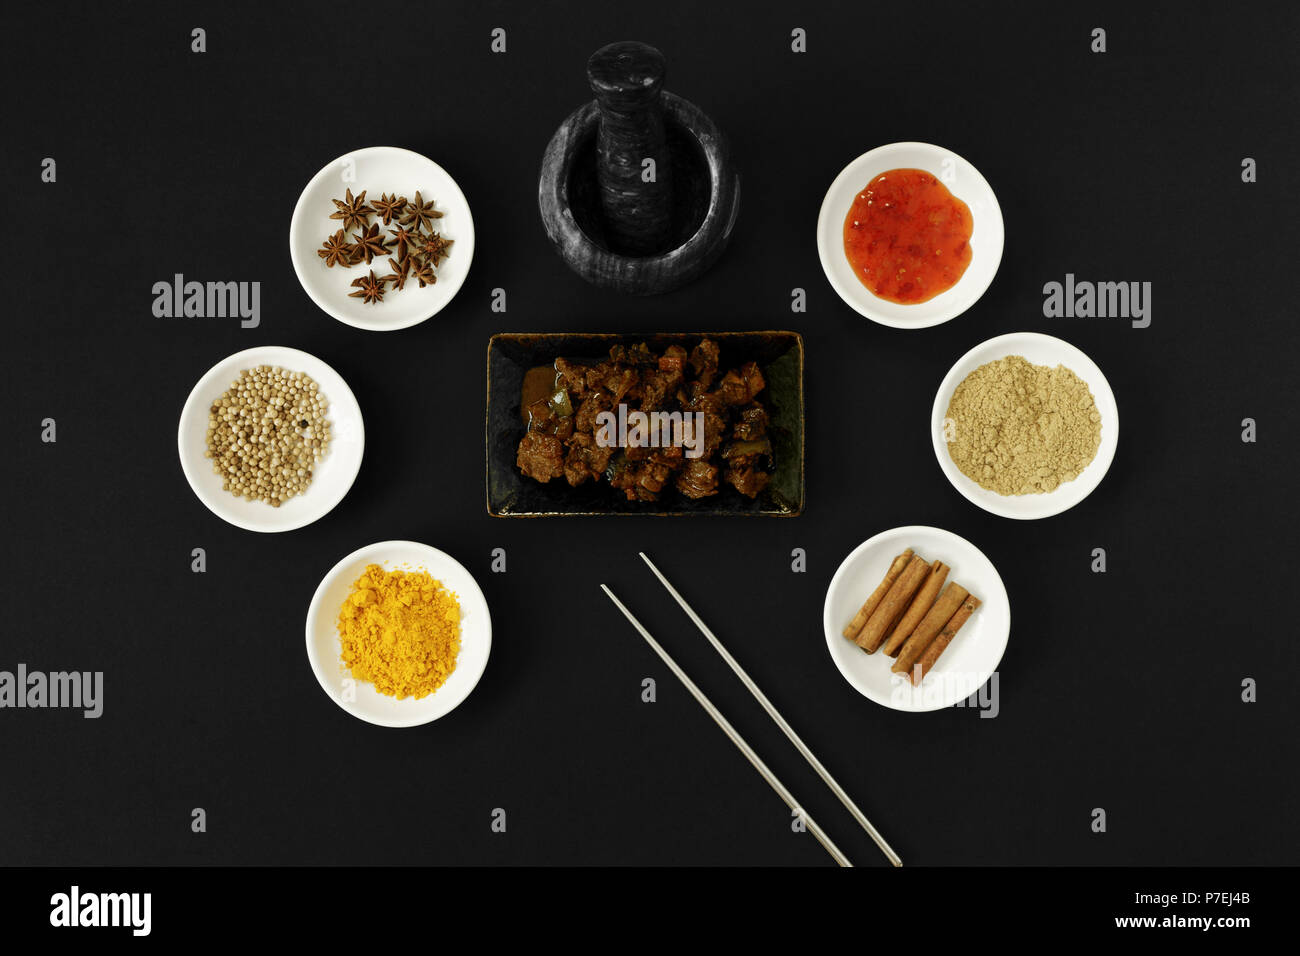 Beef dendeng cuisine with asian spices, herbs and cooking ingredients on black background. Stock Photo